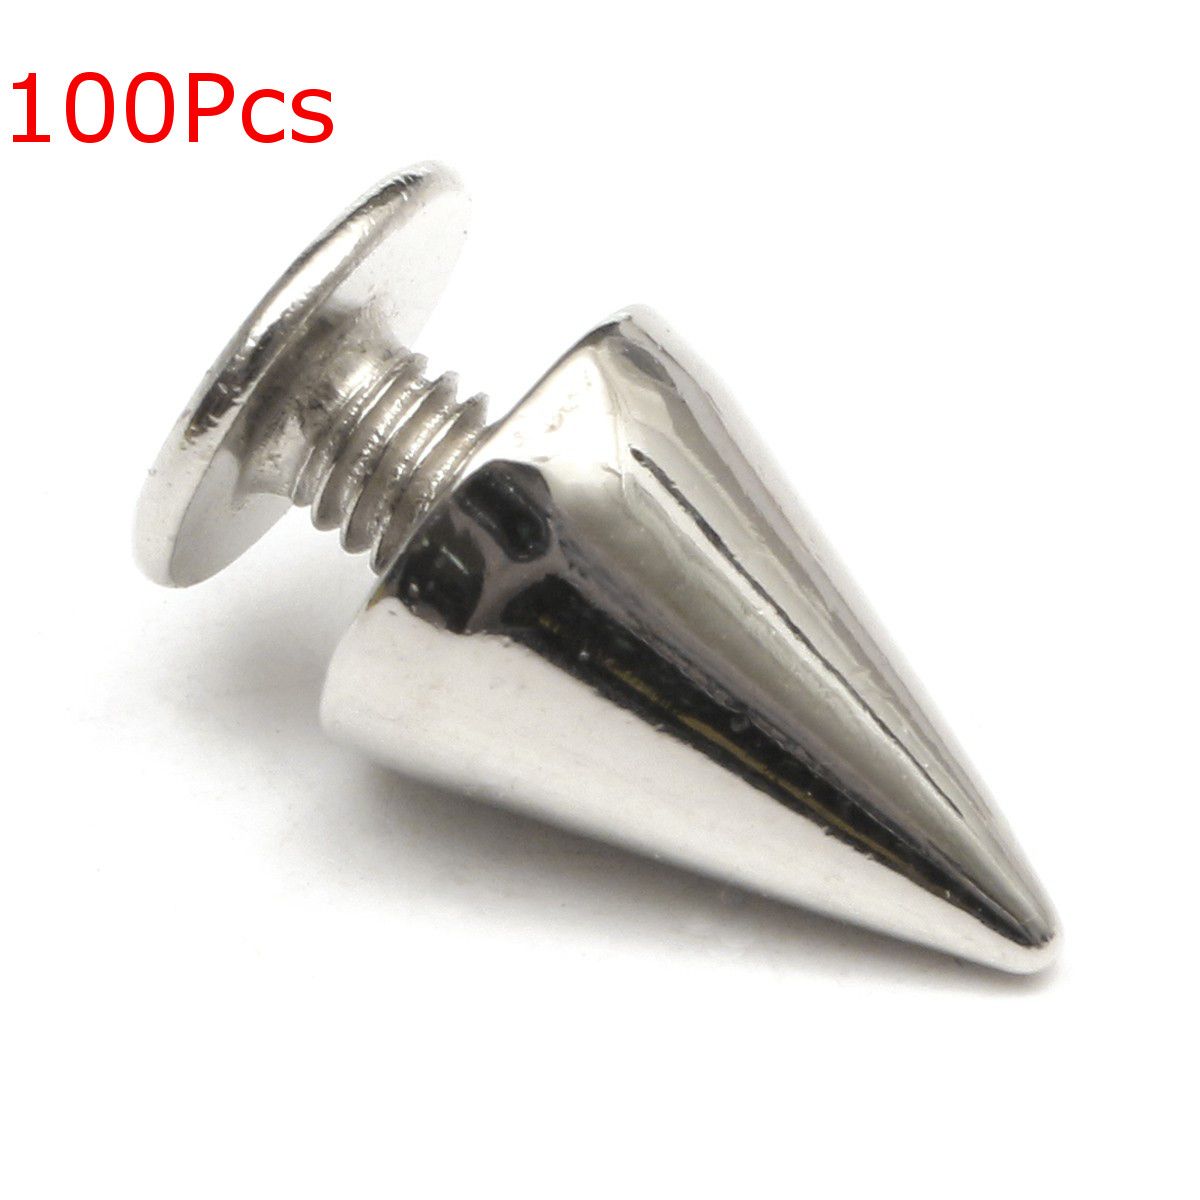 100Pcs-7x10mm-Metal-Silver-Studs-Rivet-Bullet-Spike-Cone-Screw-For-Leather-Craft-1106797